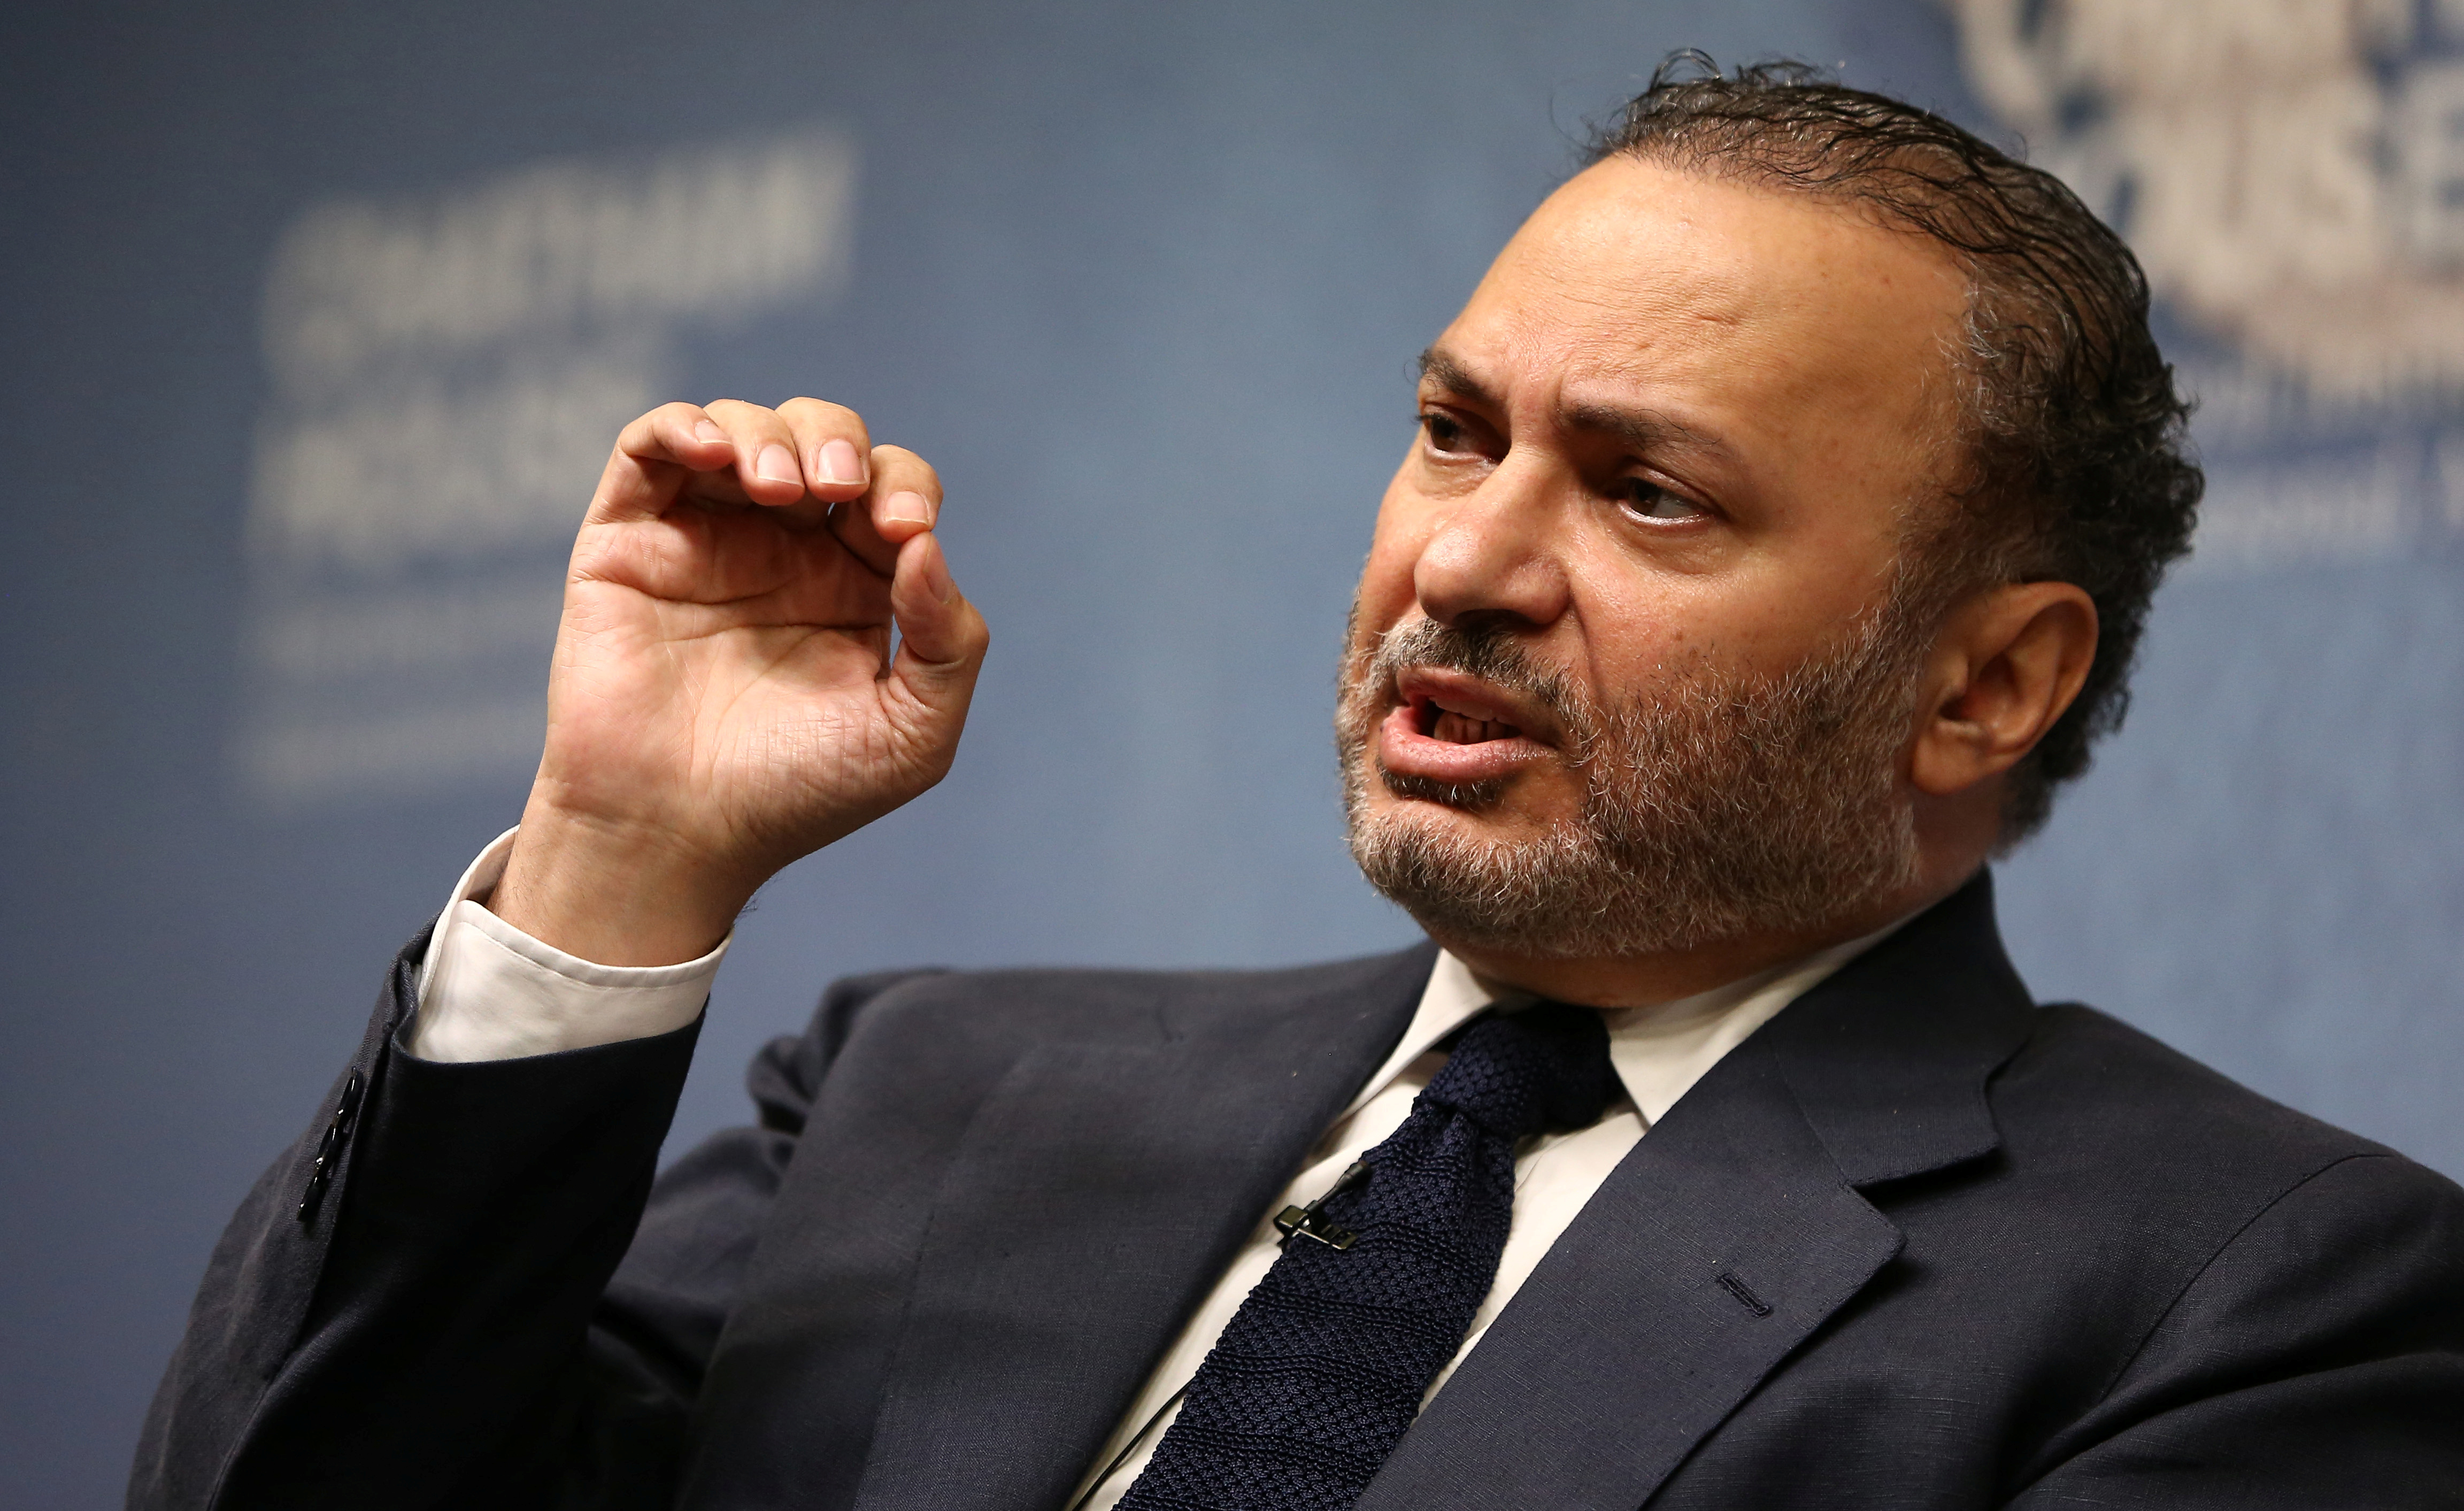 Minister of State for Foreign Affairs for the United Arab Emirates, Anwar Gargash, speaks at an event at Chatham House in London